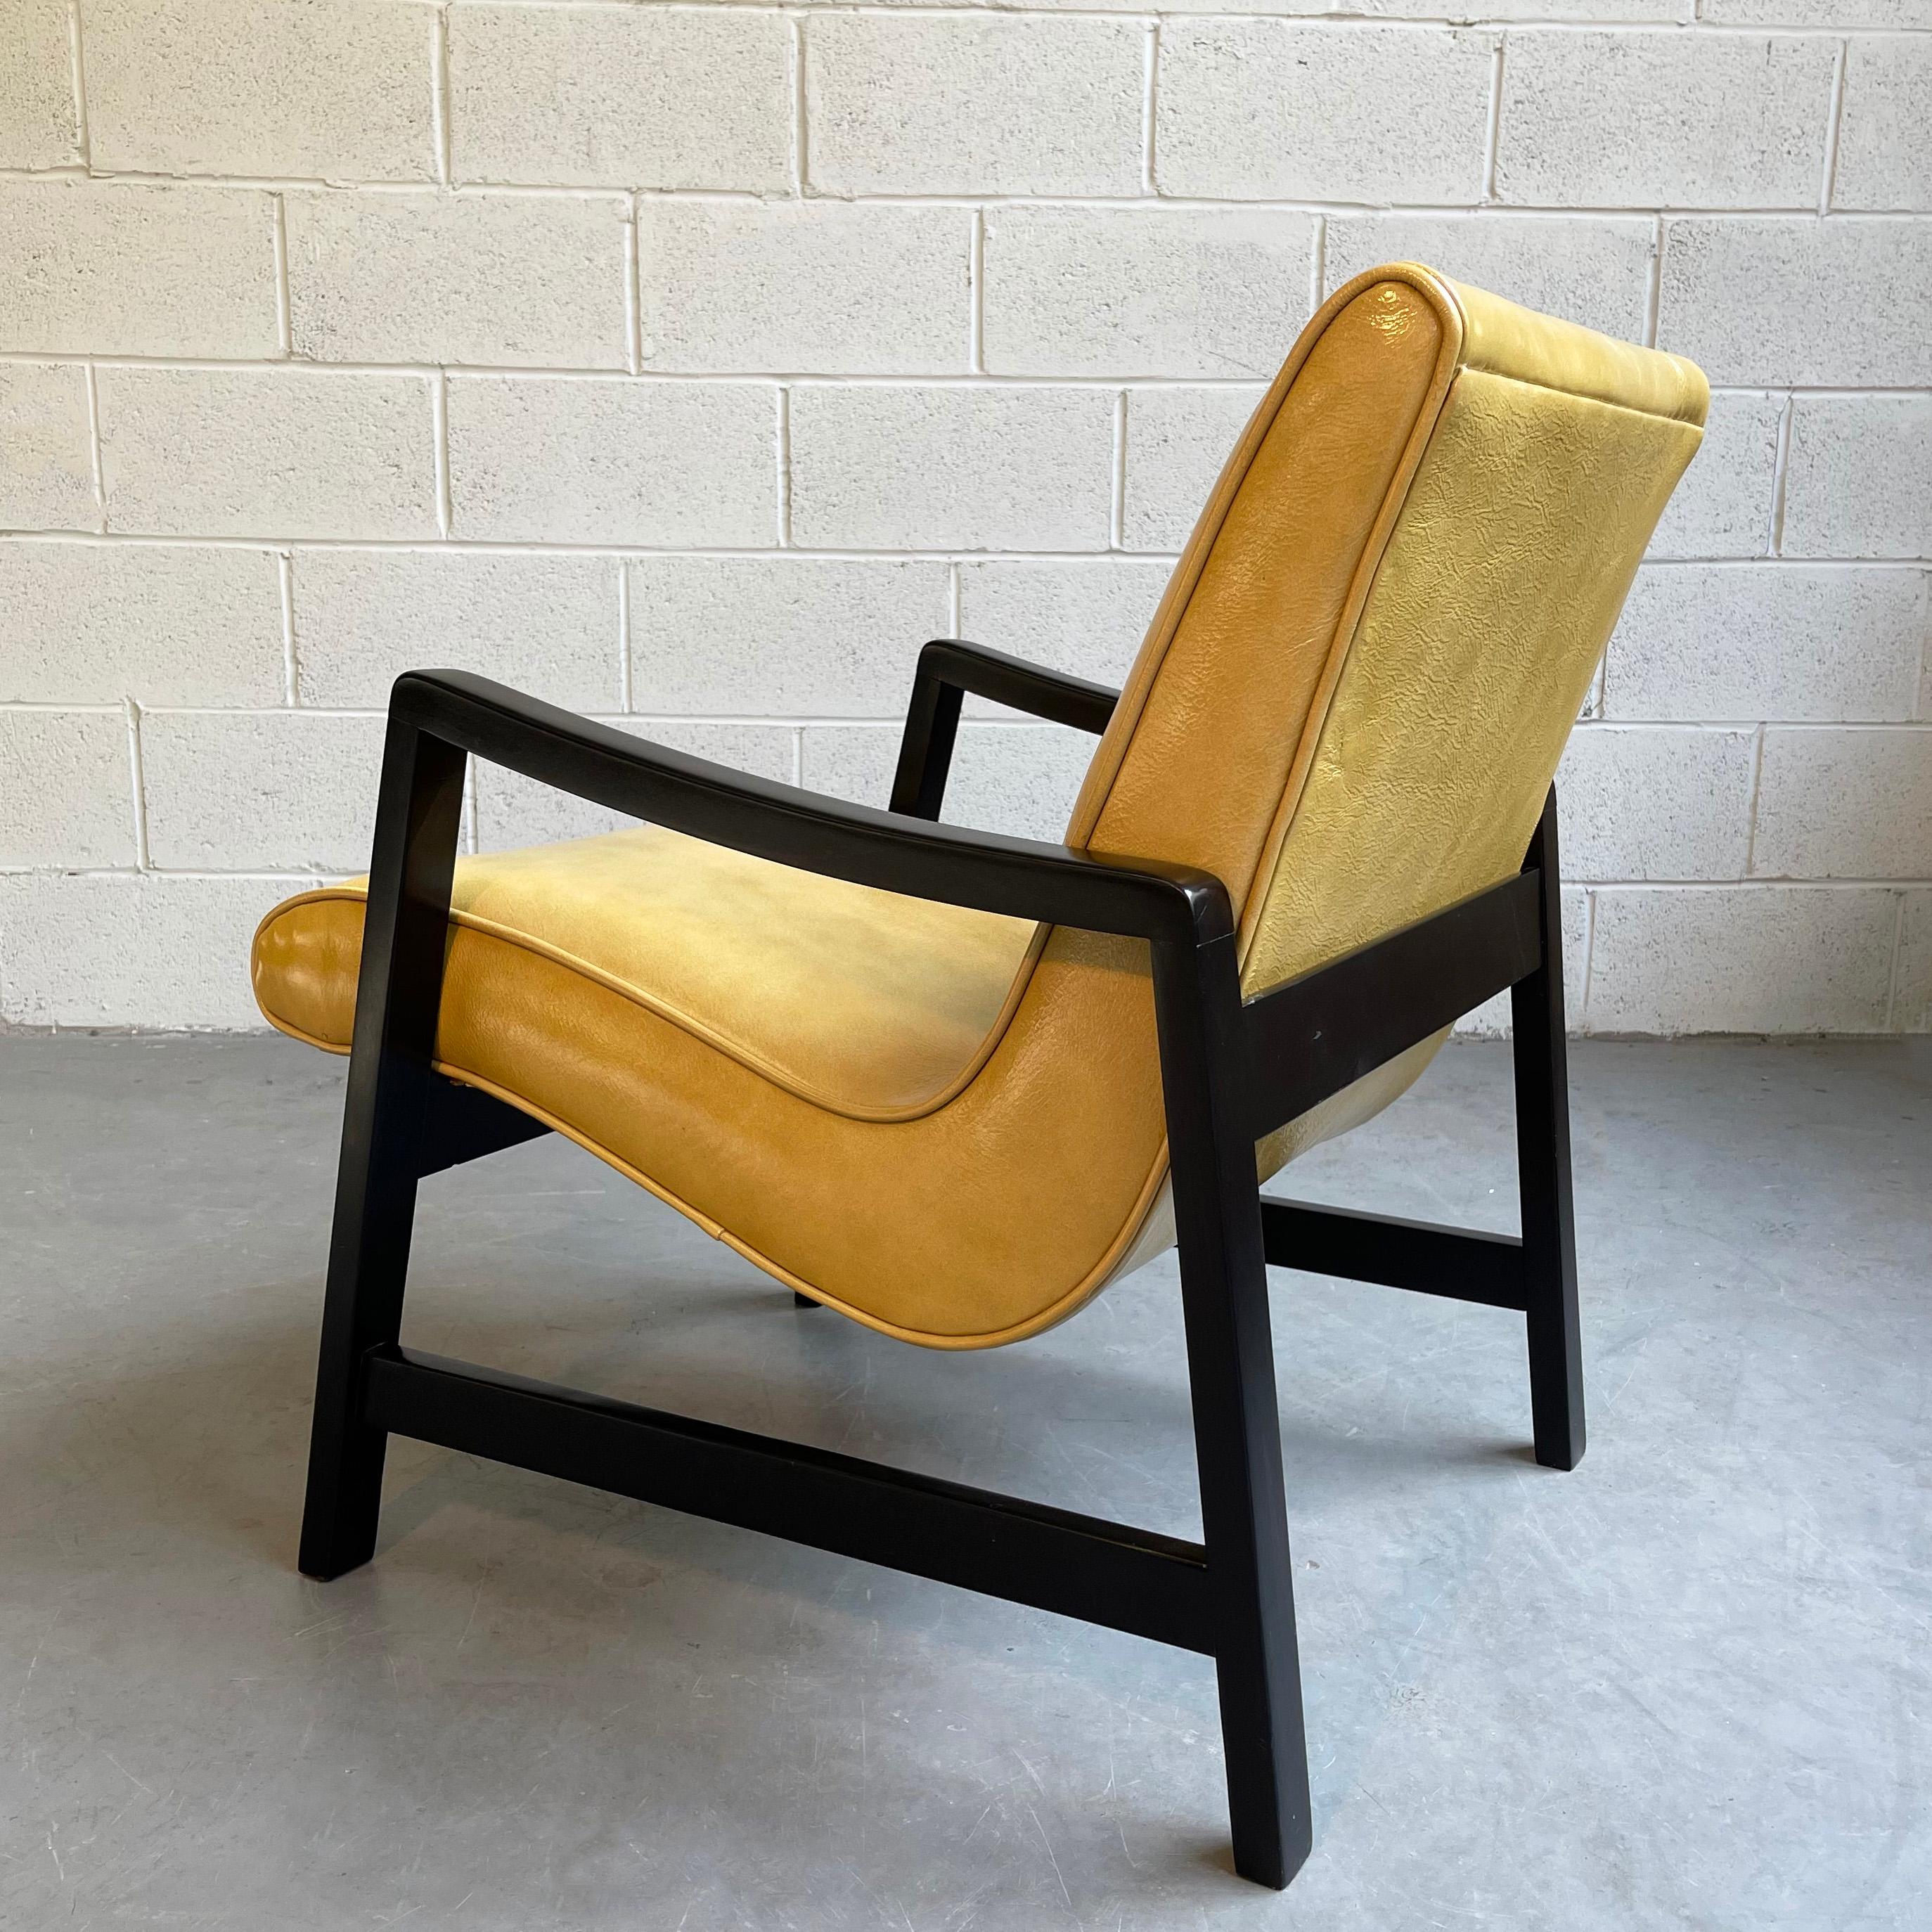 American Mid-Century Modern Scoop Leather Lounge Chair By Jens Risom For Knoll For Sale